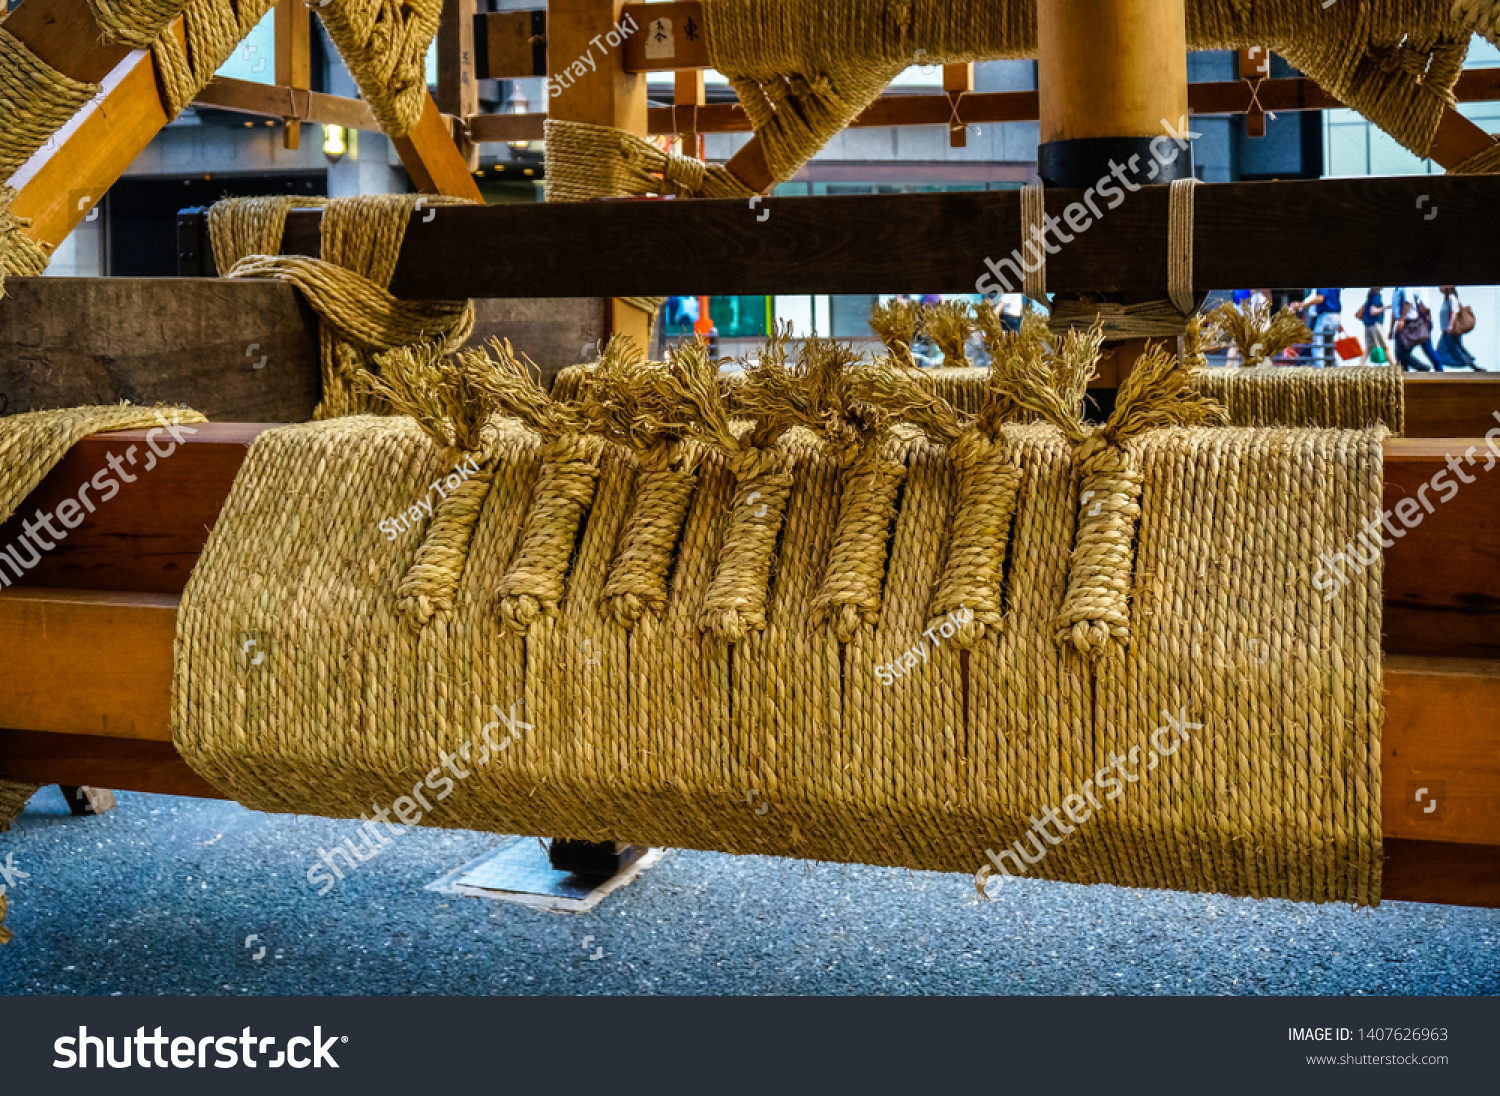 Construction details of Hoko float for the annual Gion Matsuri festival in Kyoto, Japan. Giant floats are built without nails but are holding on the elaborately tied ropes instead #1407626963